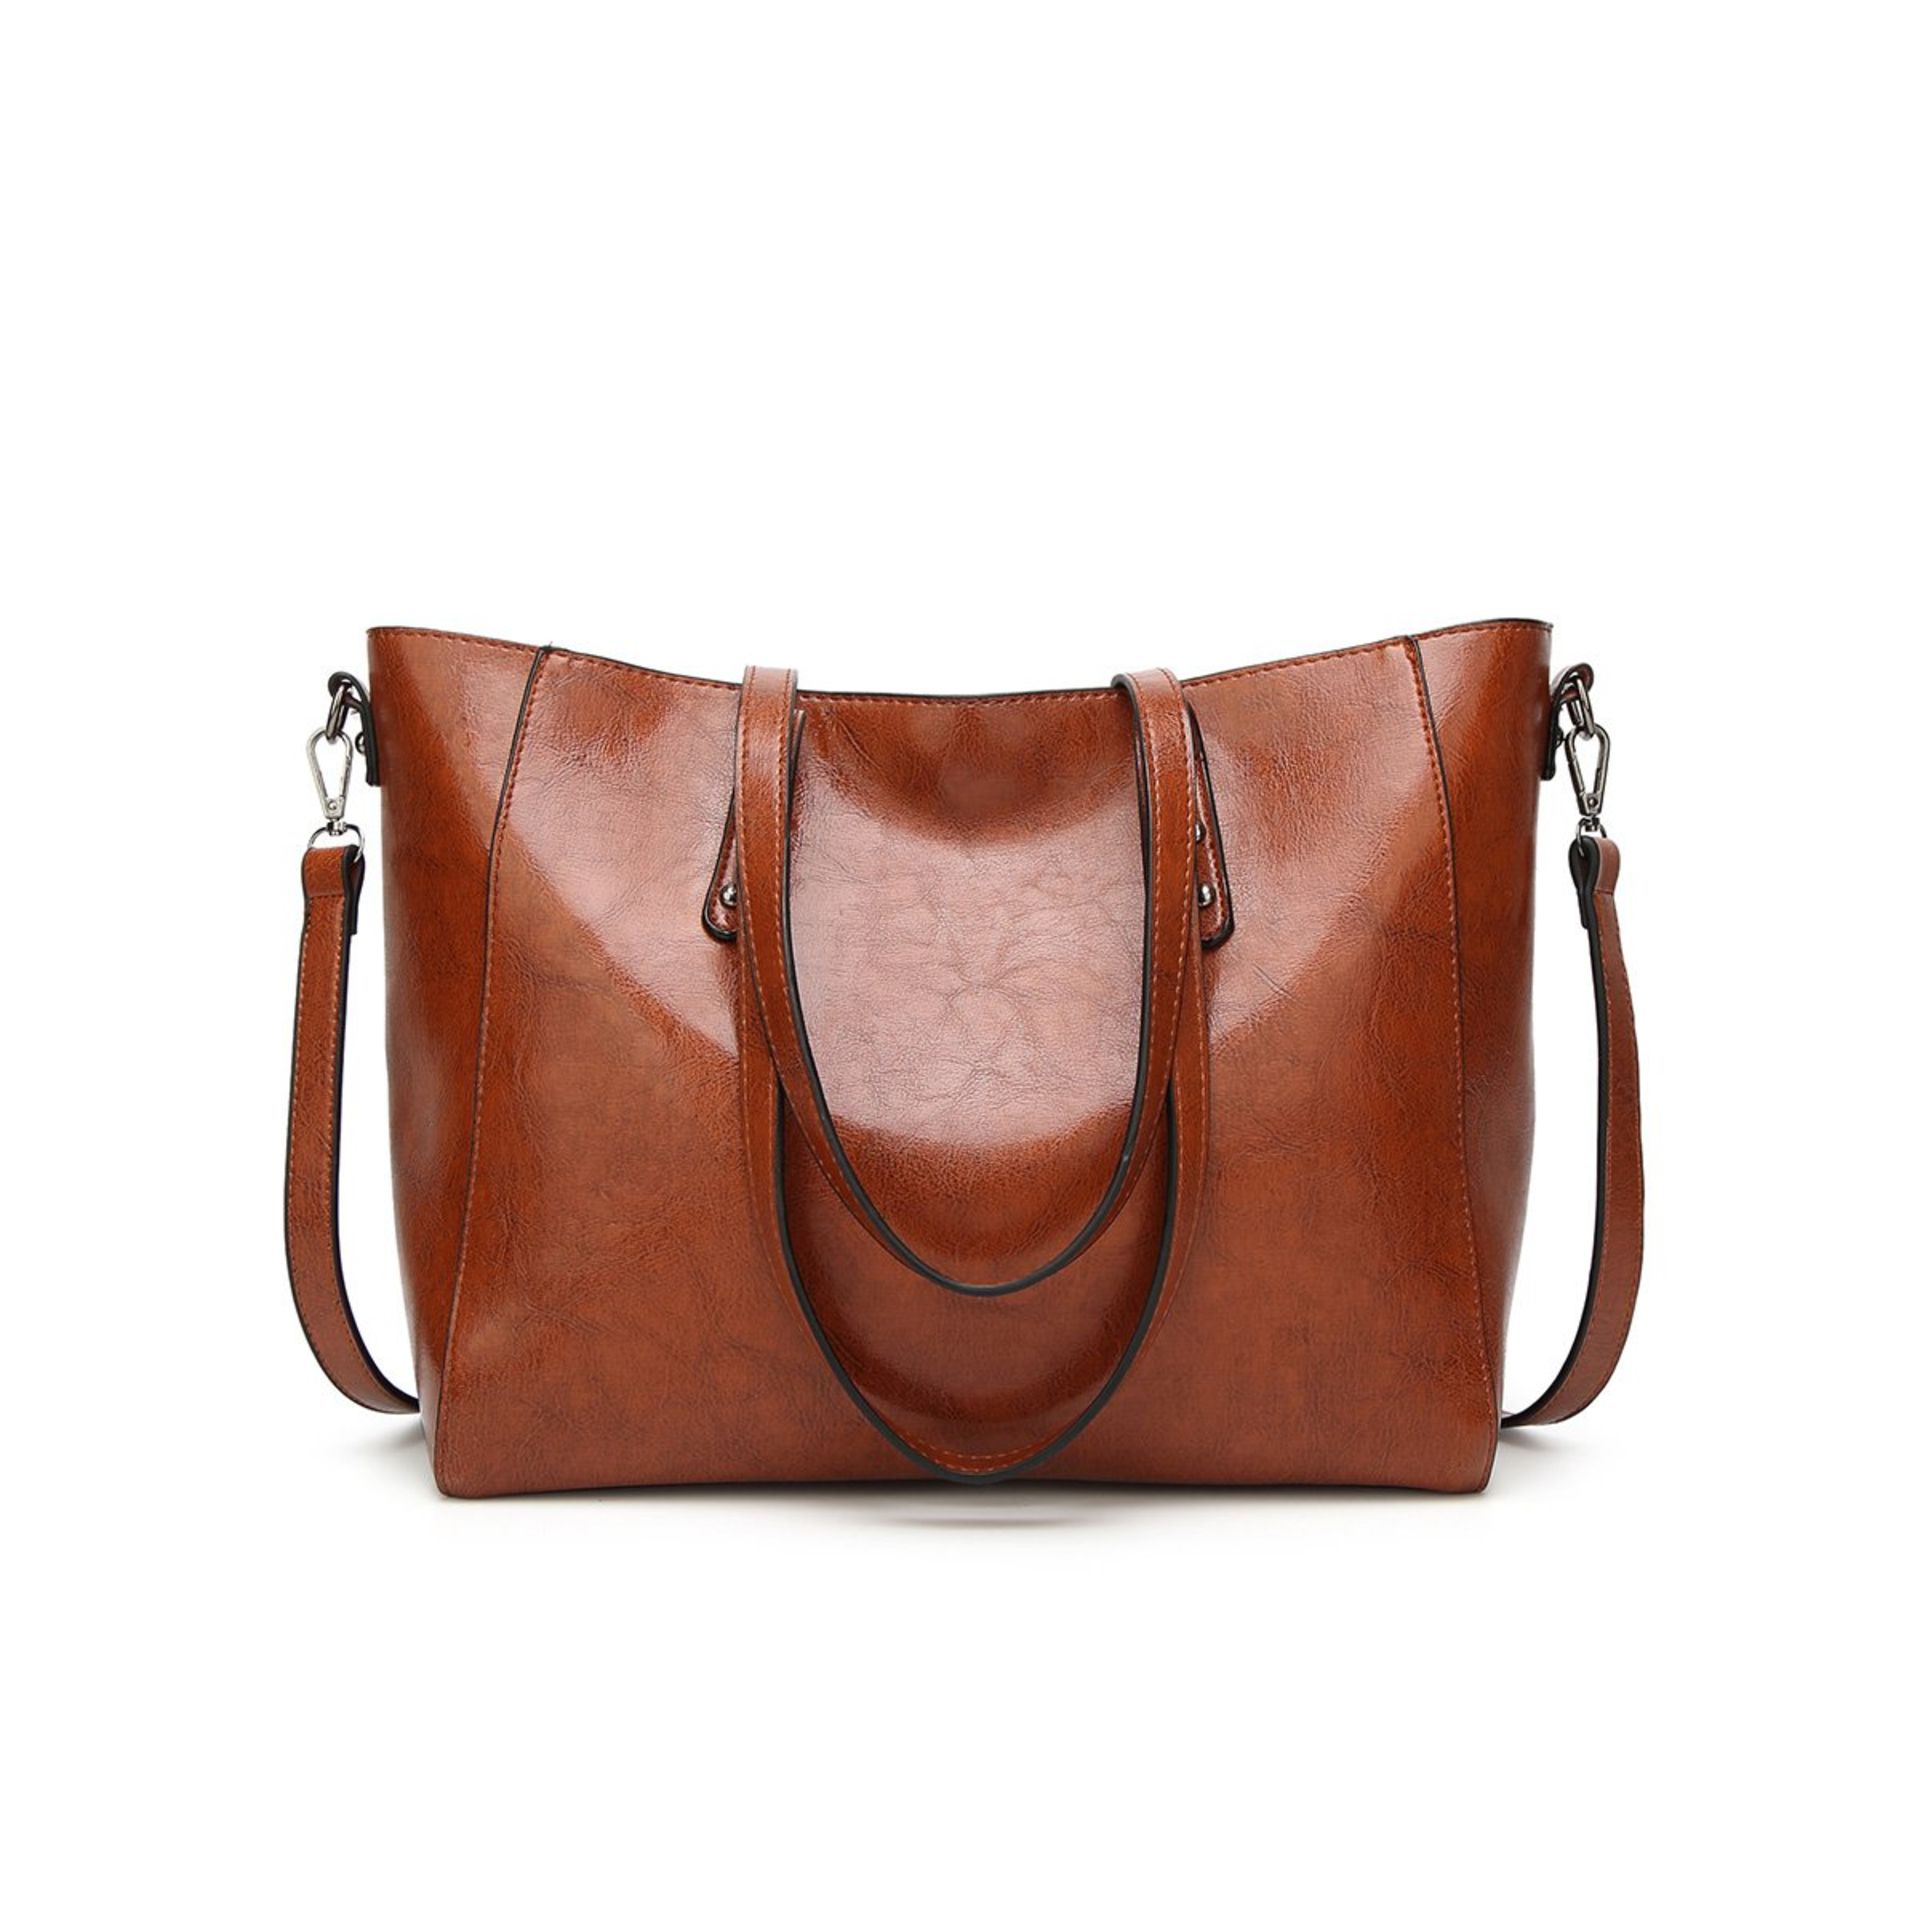 Brand New Womens Coolives High Capacity Shoulder Bag in Brown RRP £42.99